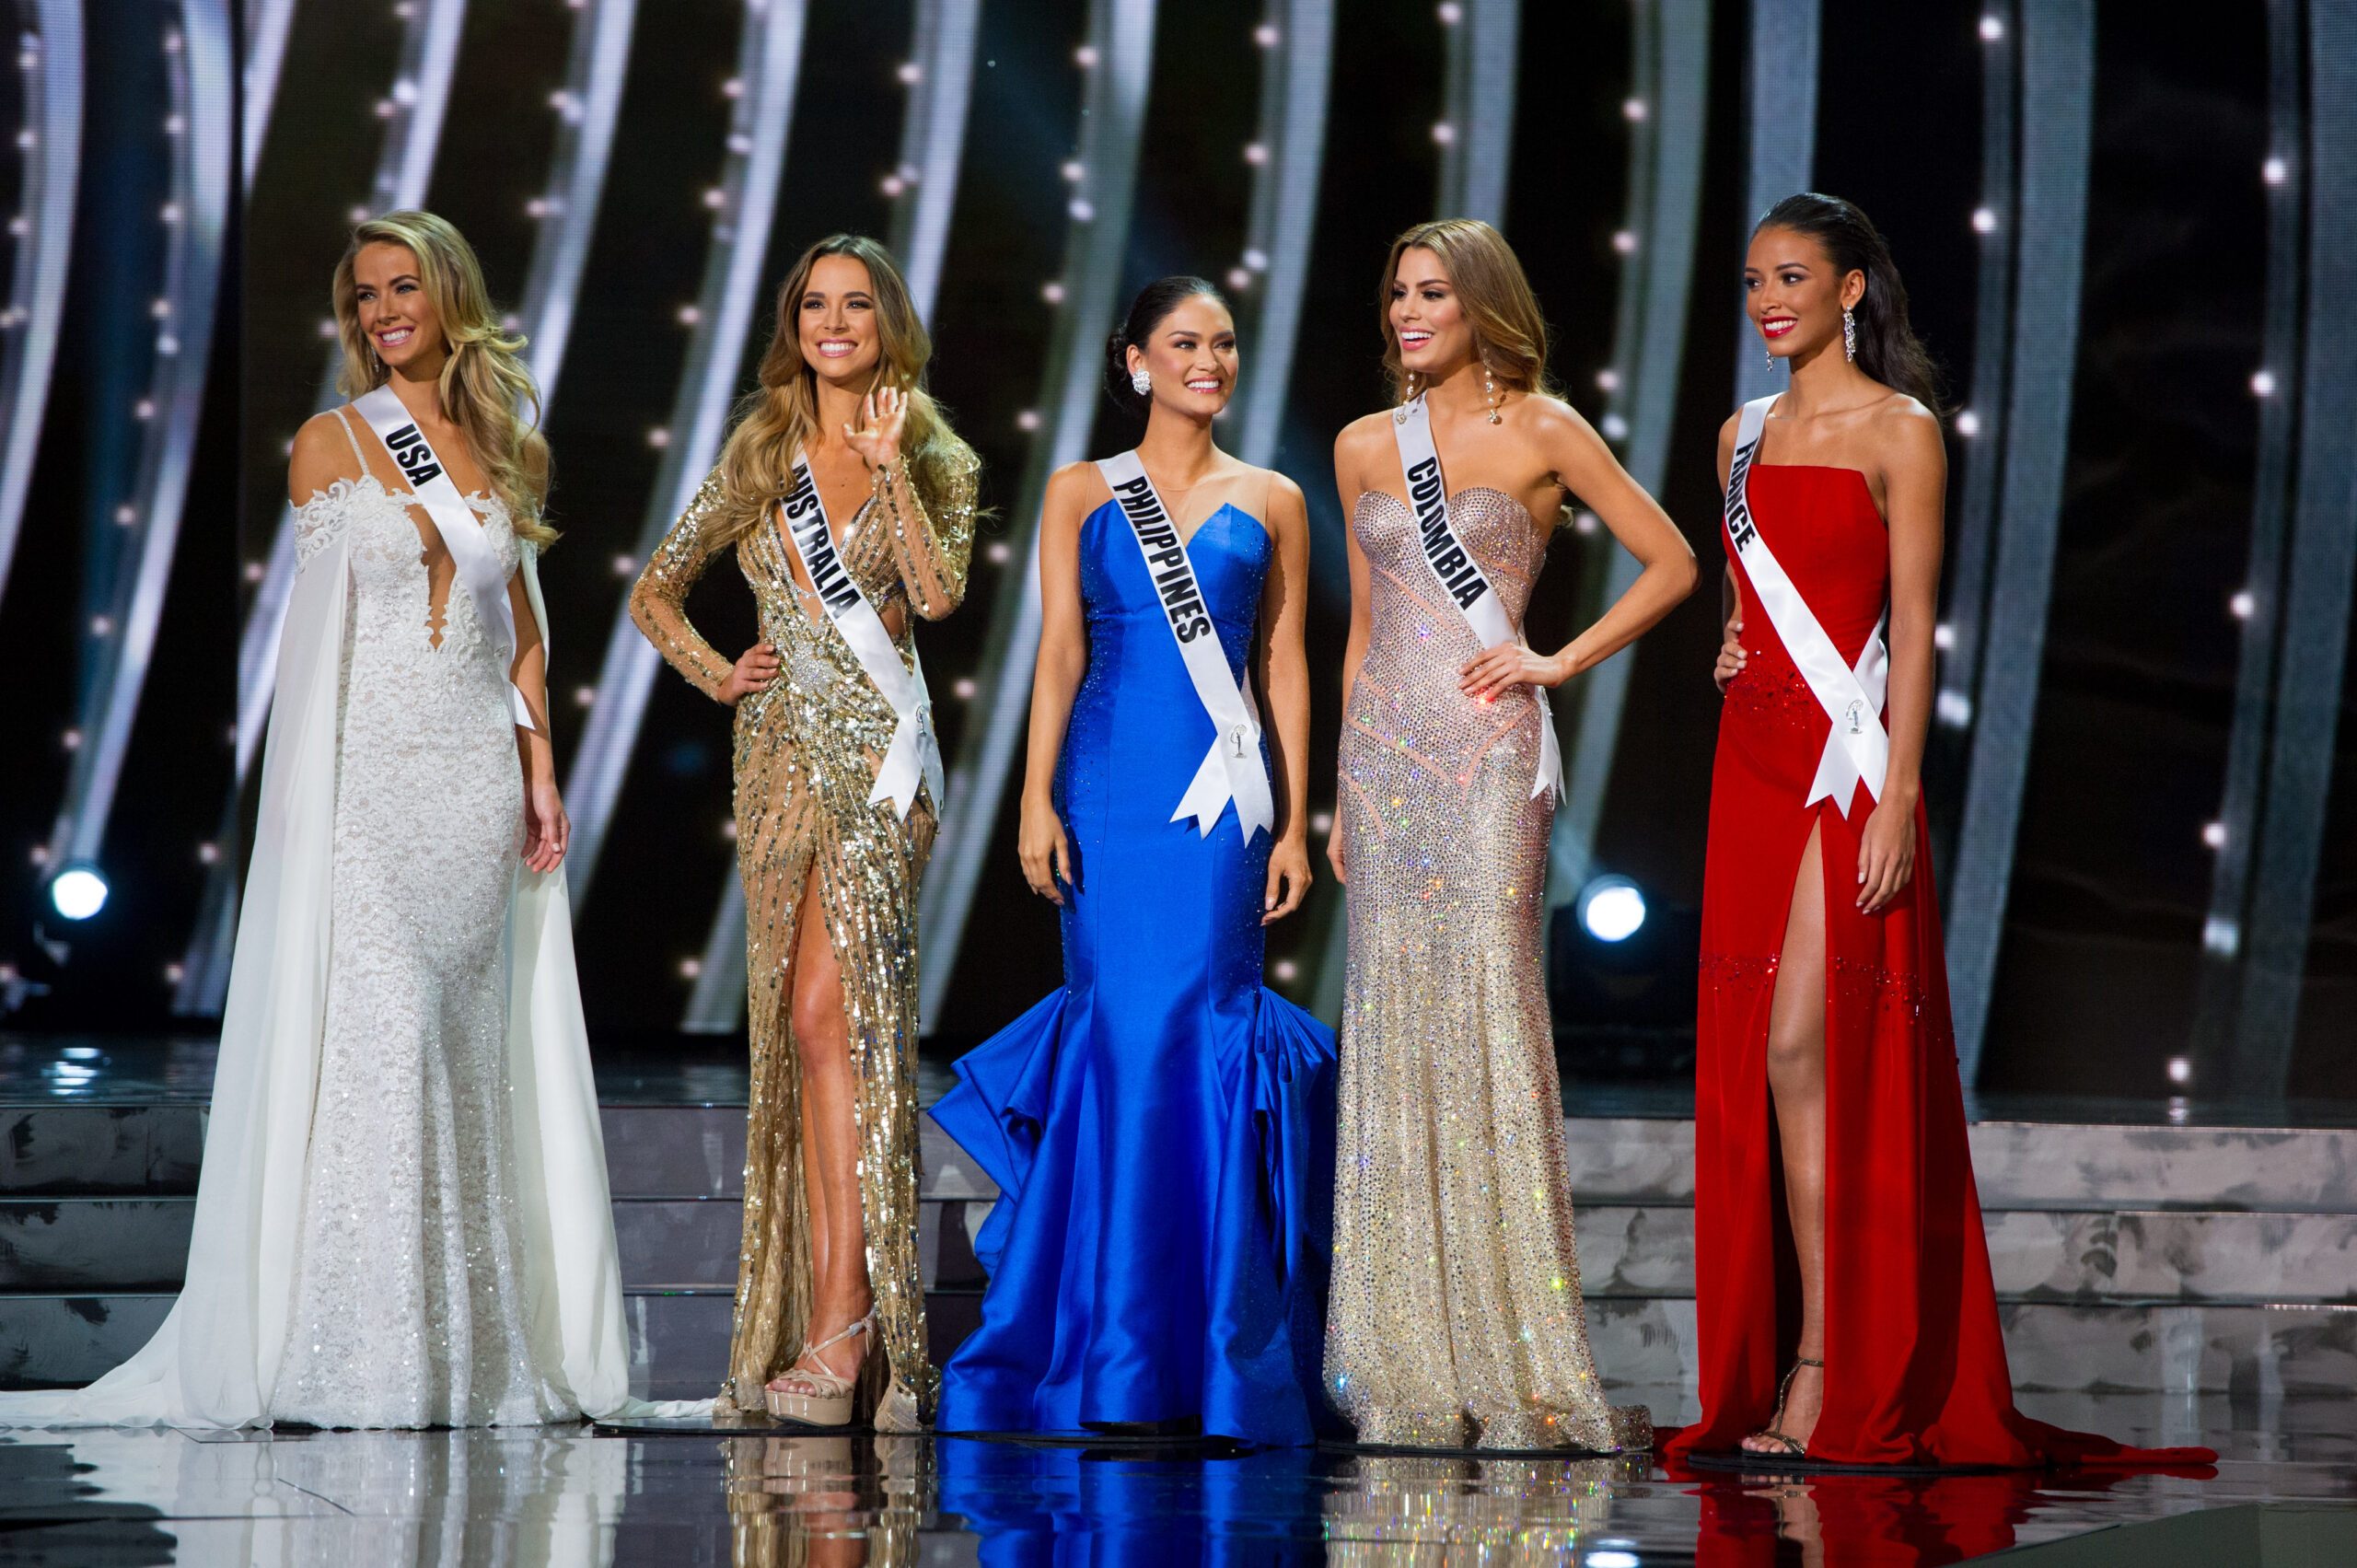 5 Miss Universe questions: Terror, drugs, foreign policy